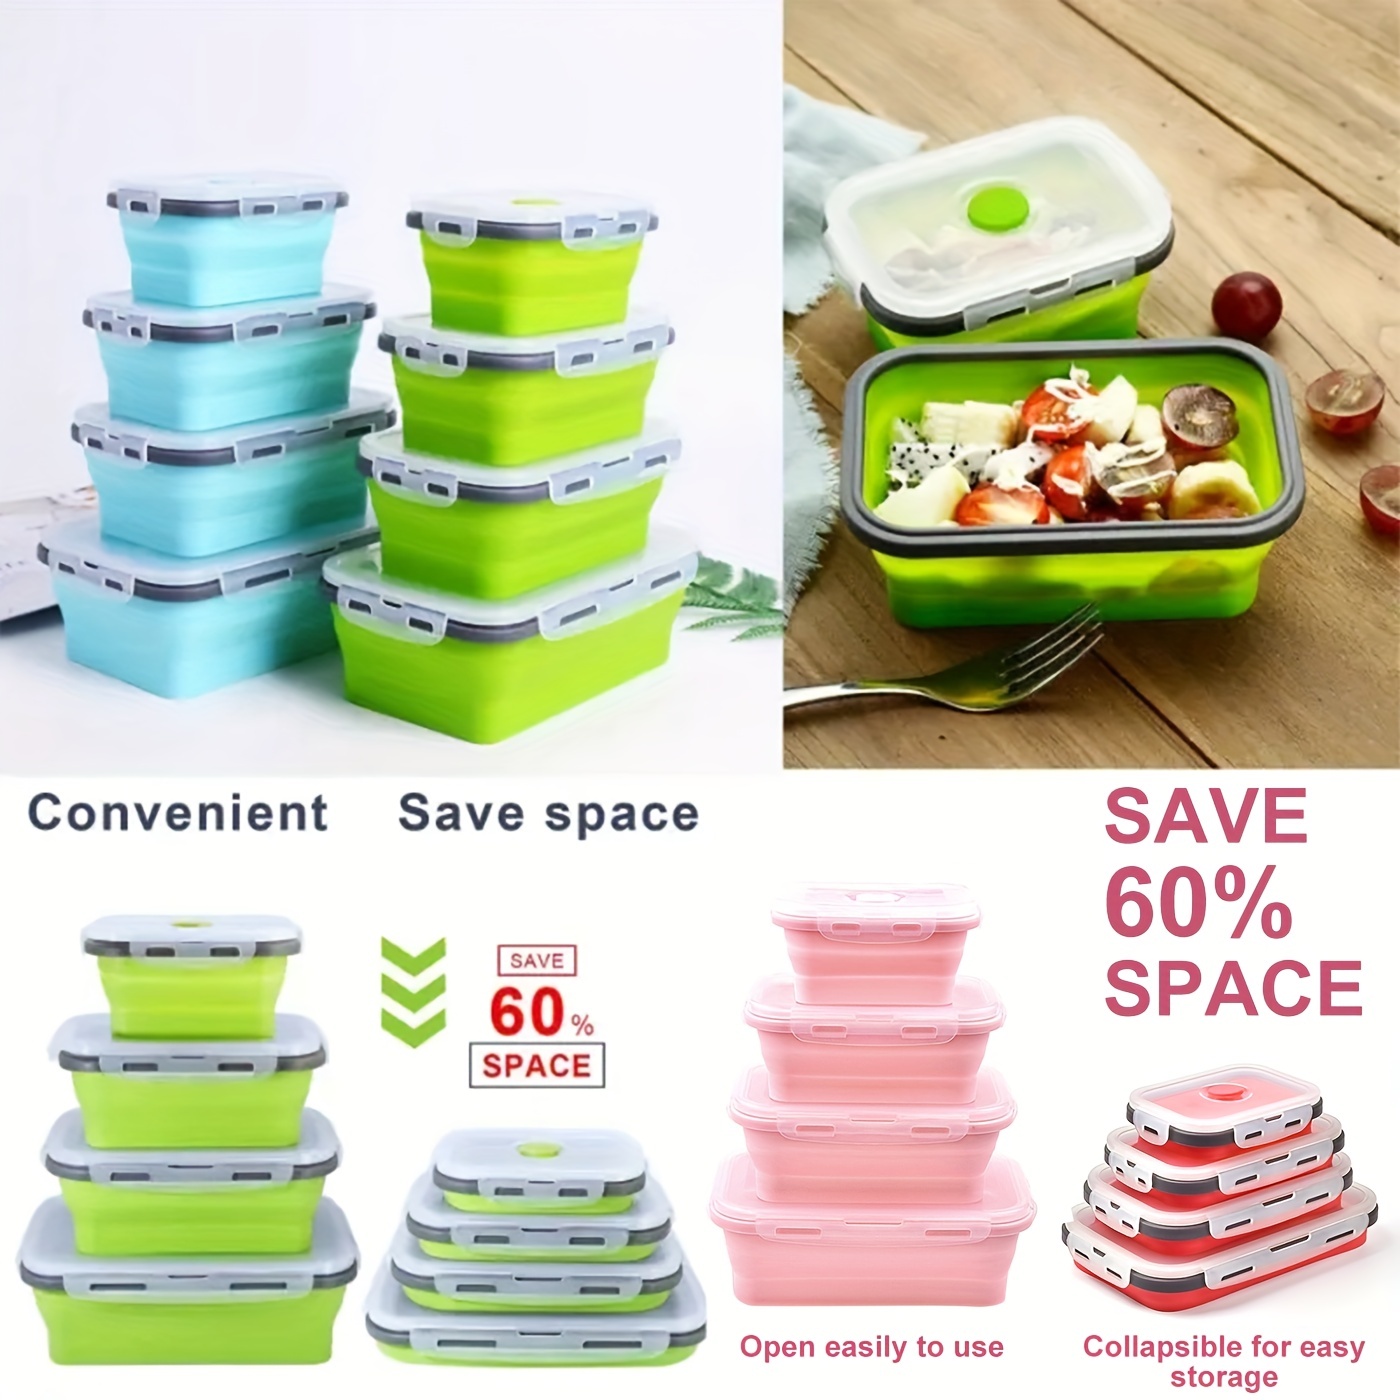 3Pcs/Set of Bowl Sets Travel Camping Outdoor Lunch Box Folding